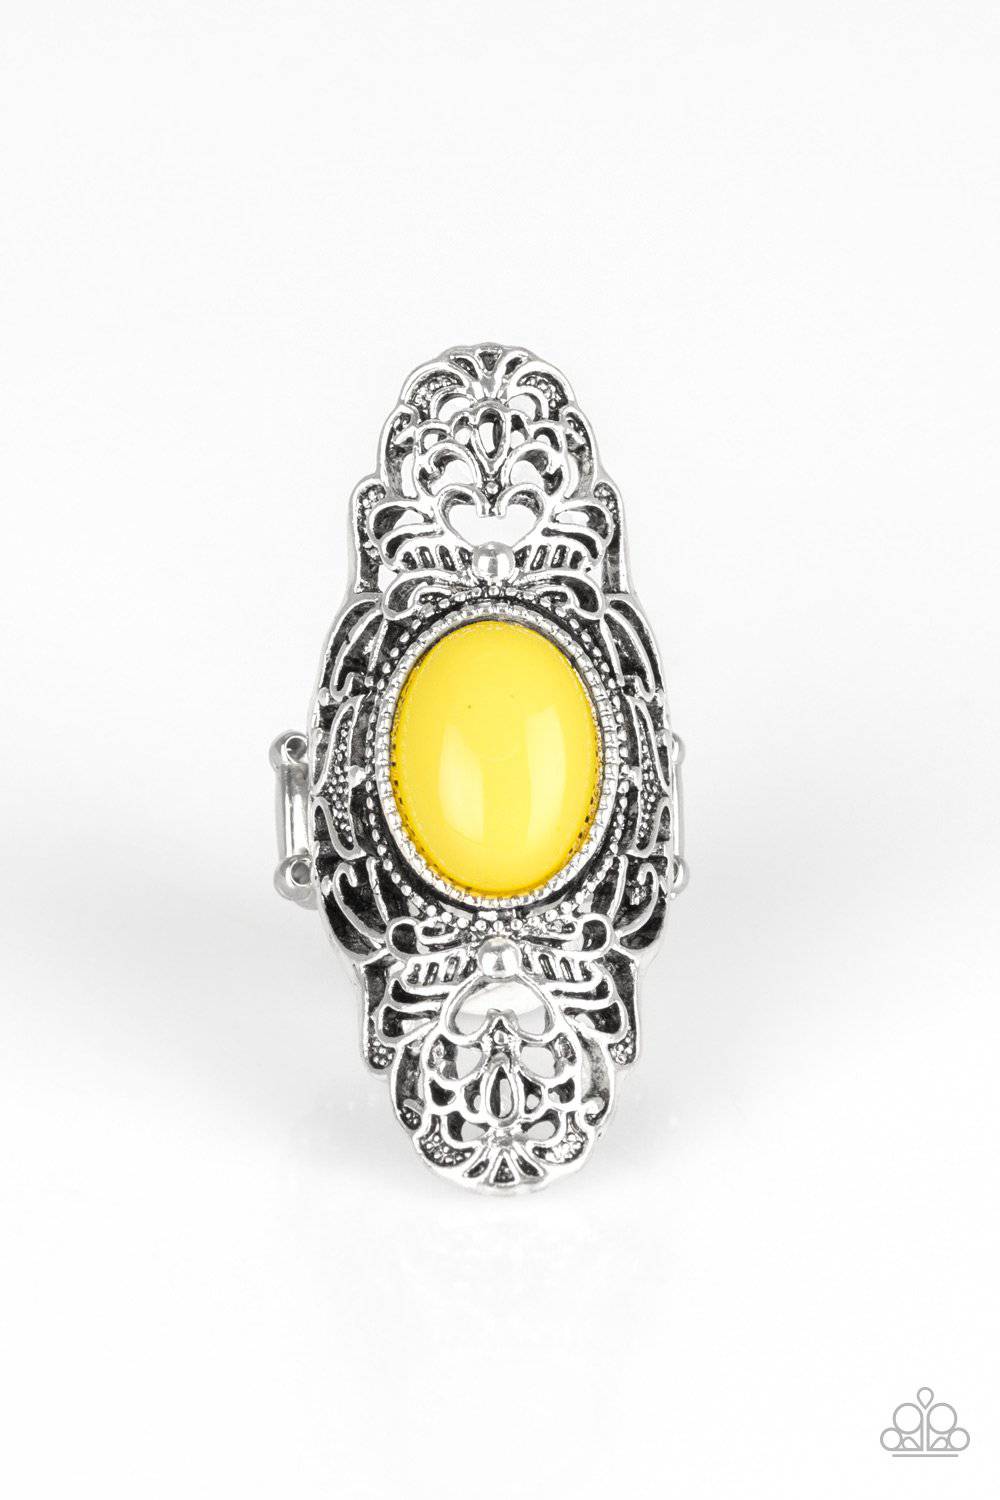 Flair for the Dramatic - Yellow - GlaMarous Titi Jewels